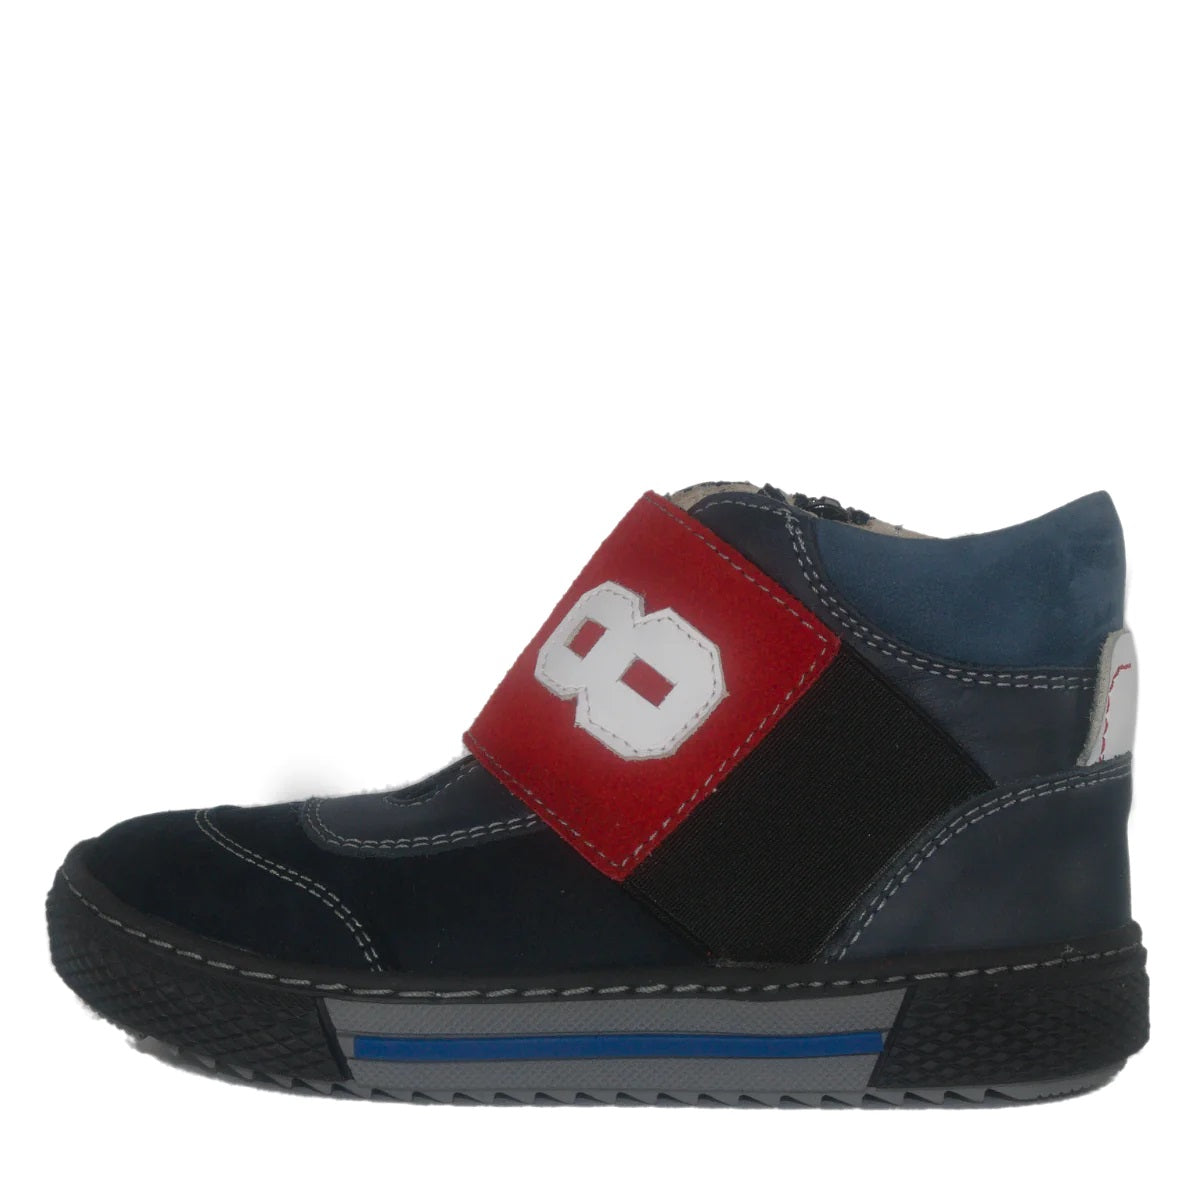 Szamos kid boy high-top shoes dark blue with wide red stretchy strap and side zipper little kid/big kid size